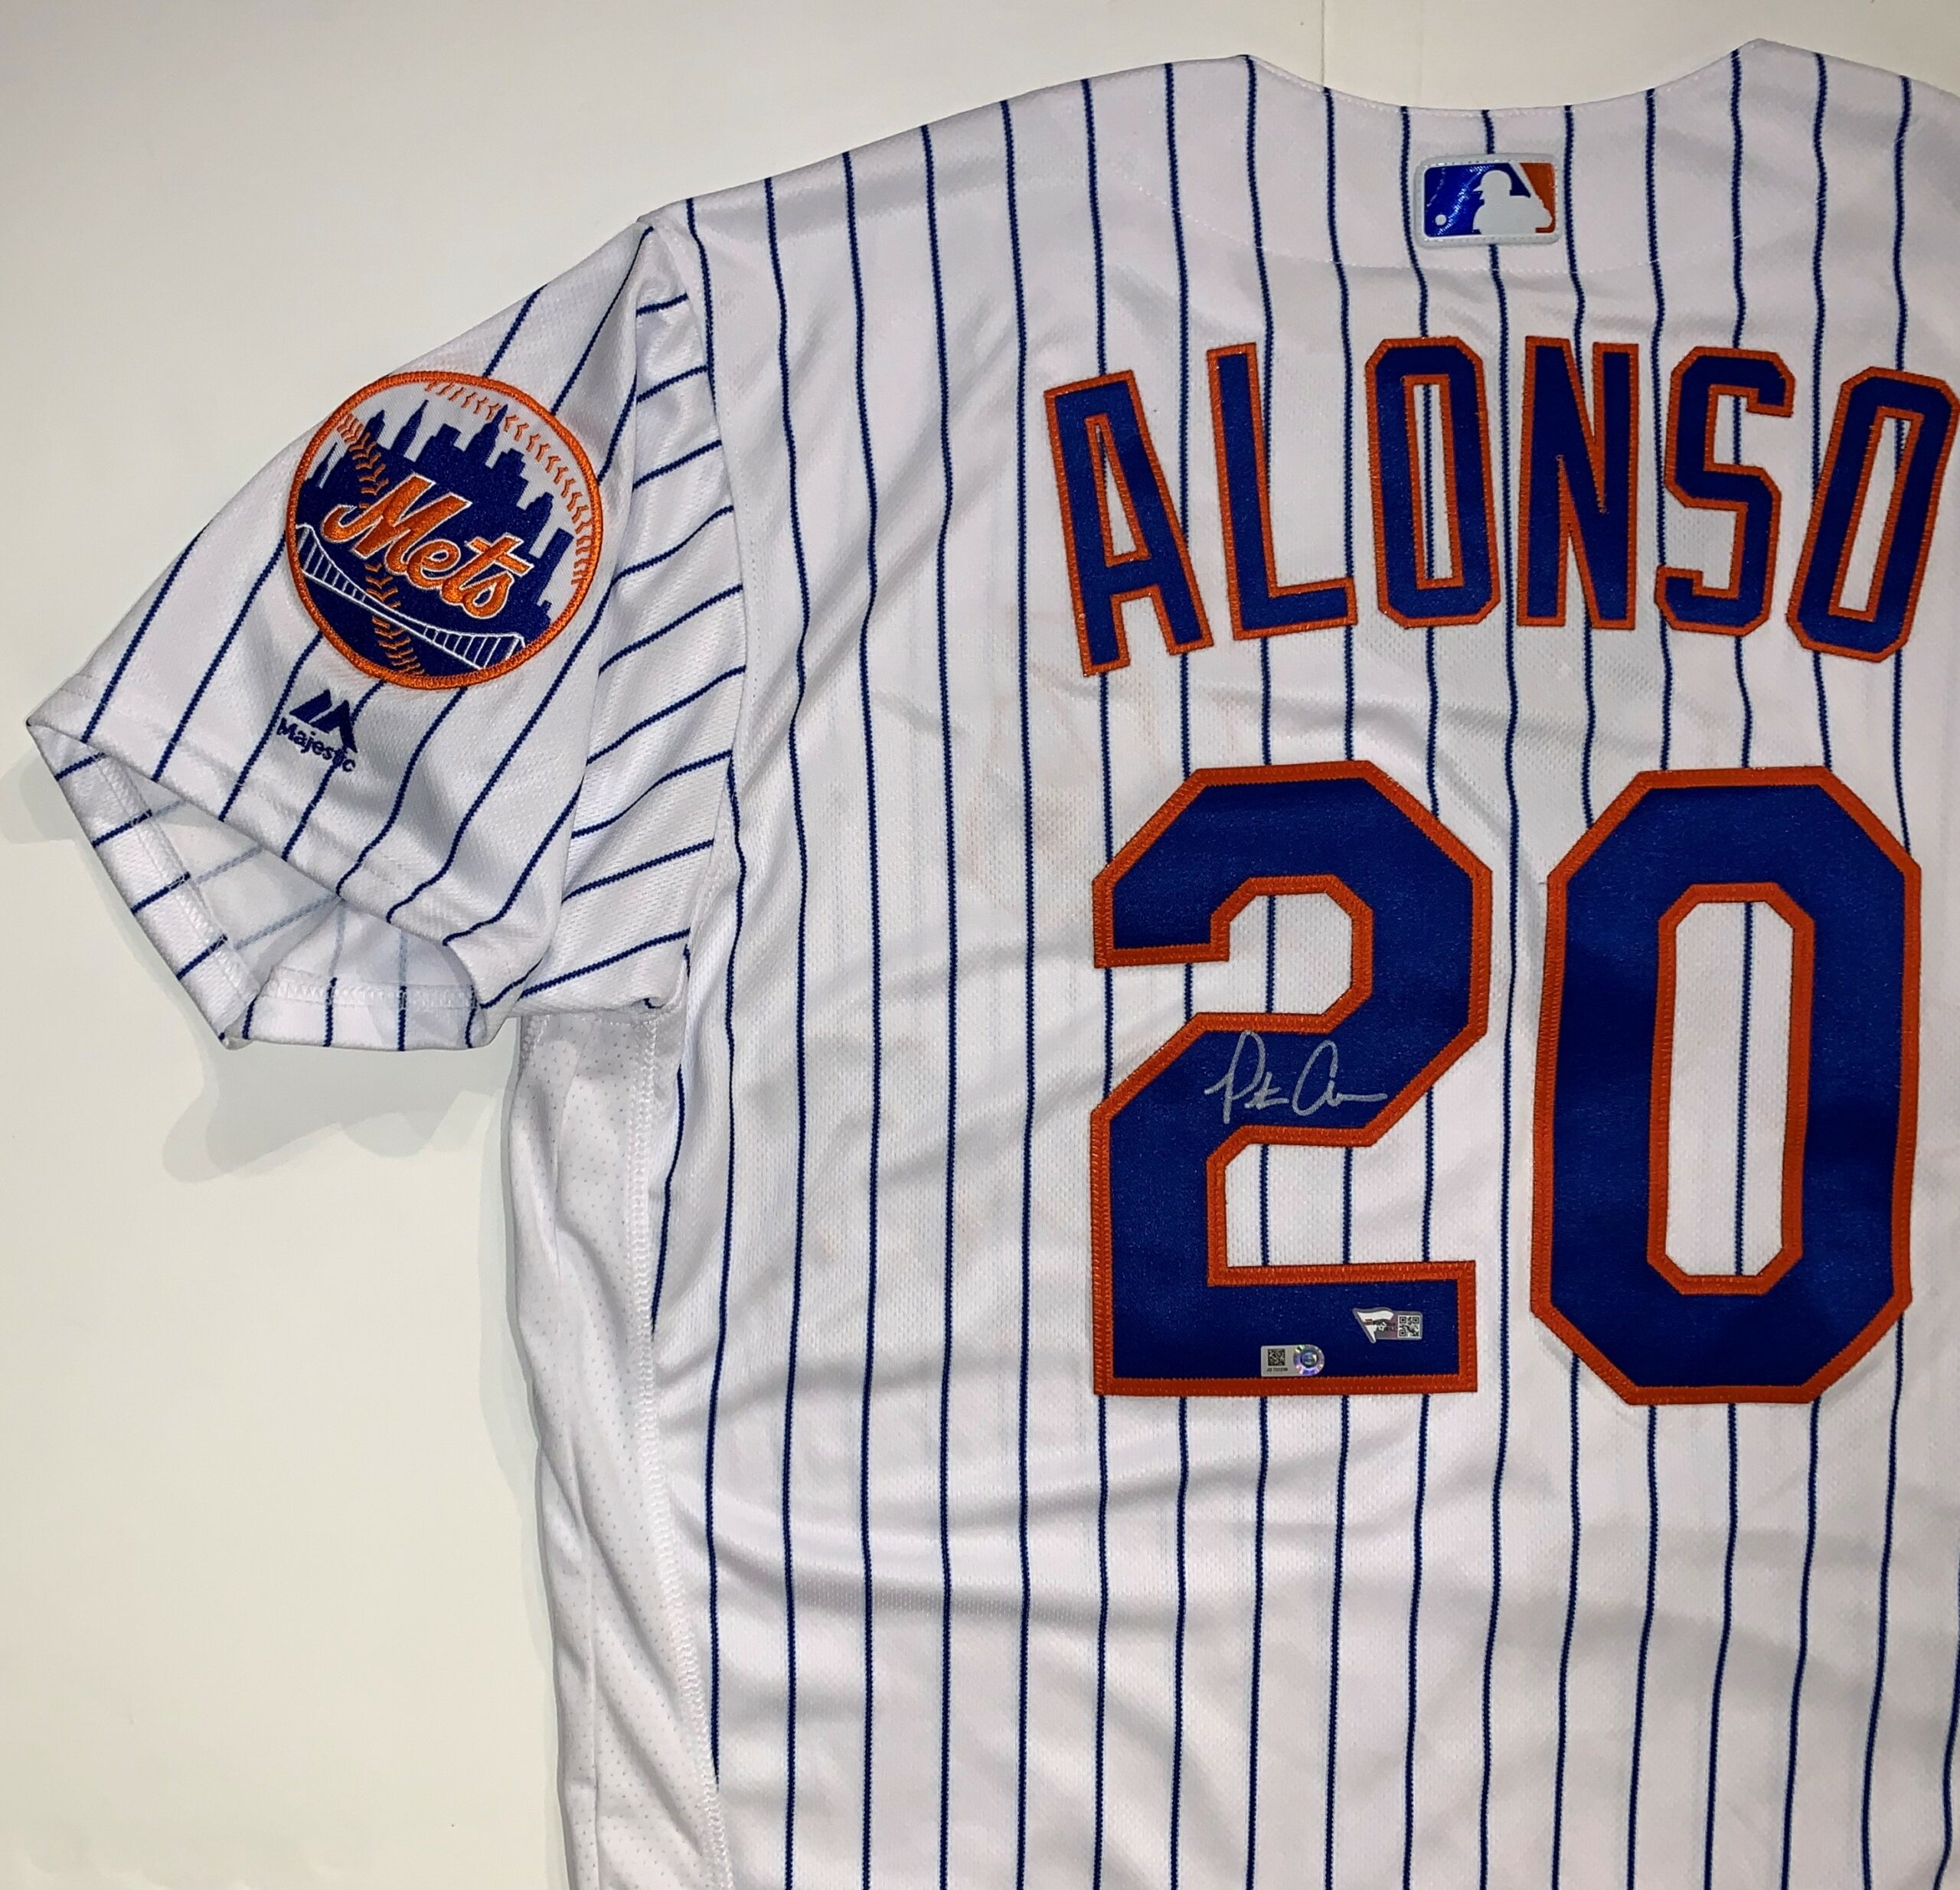 Pete Alonso New York Mets Autographed Blue Nike Authentic Jersey - Art by  Cortney Wall - #1 of Limited Edition 1 - WN55913599